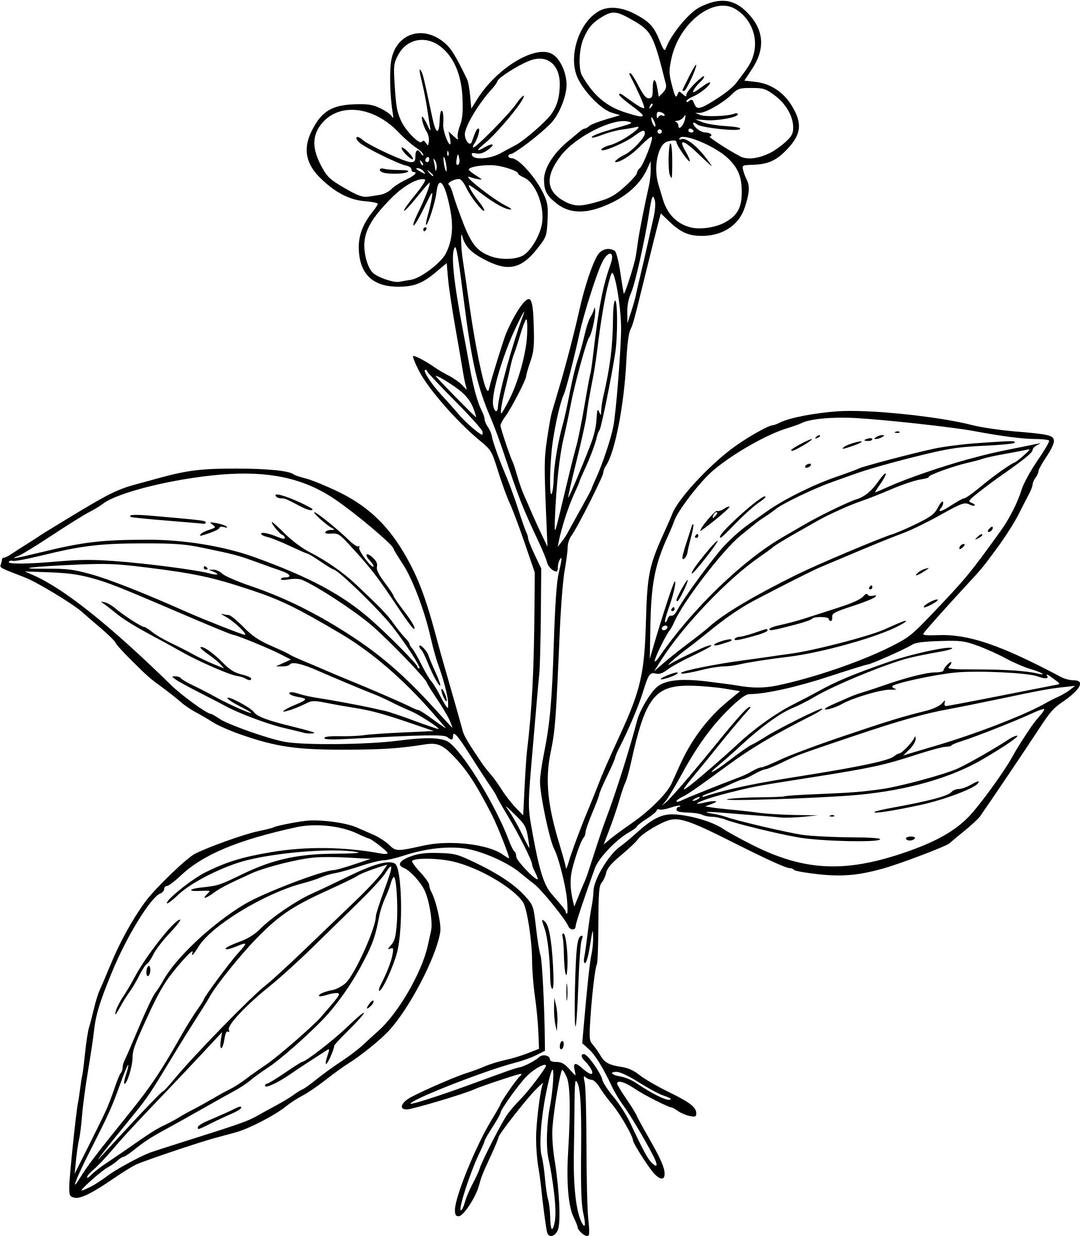 Plantain-leaved buttercup png transparent